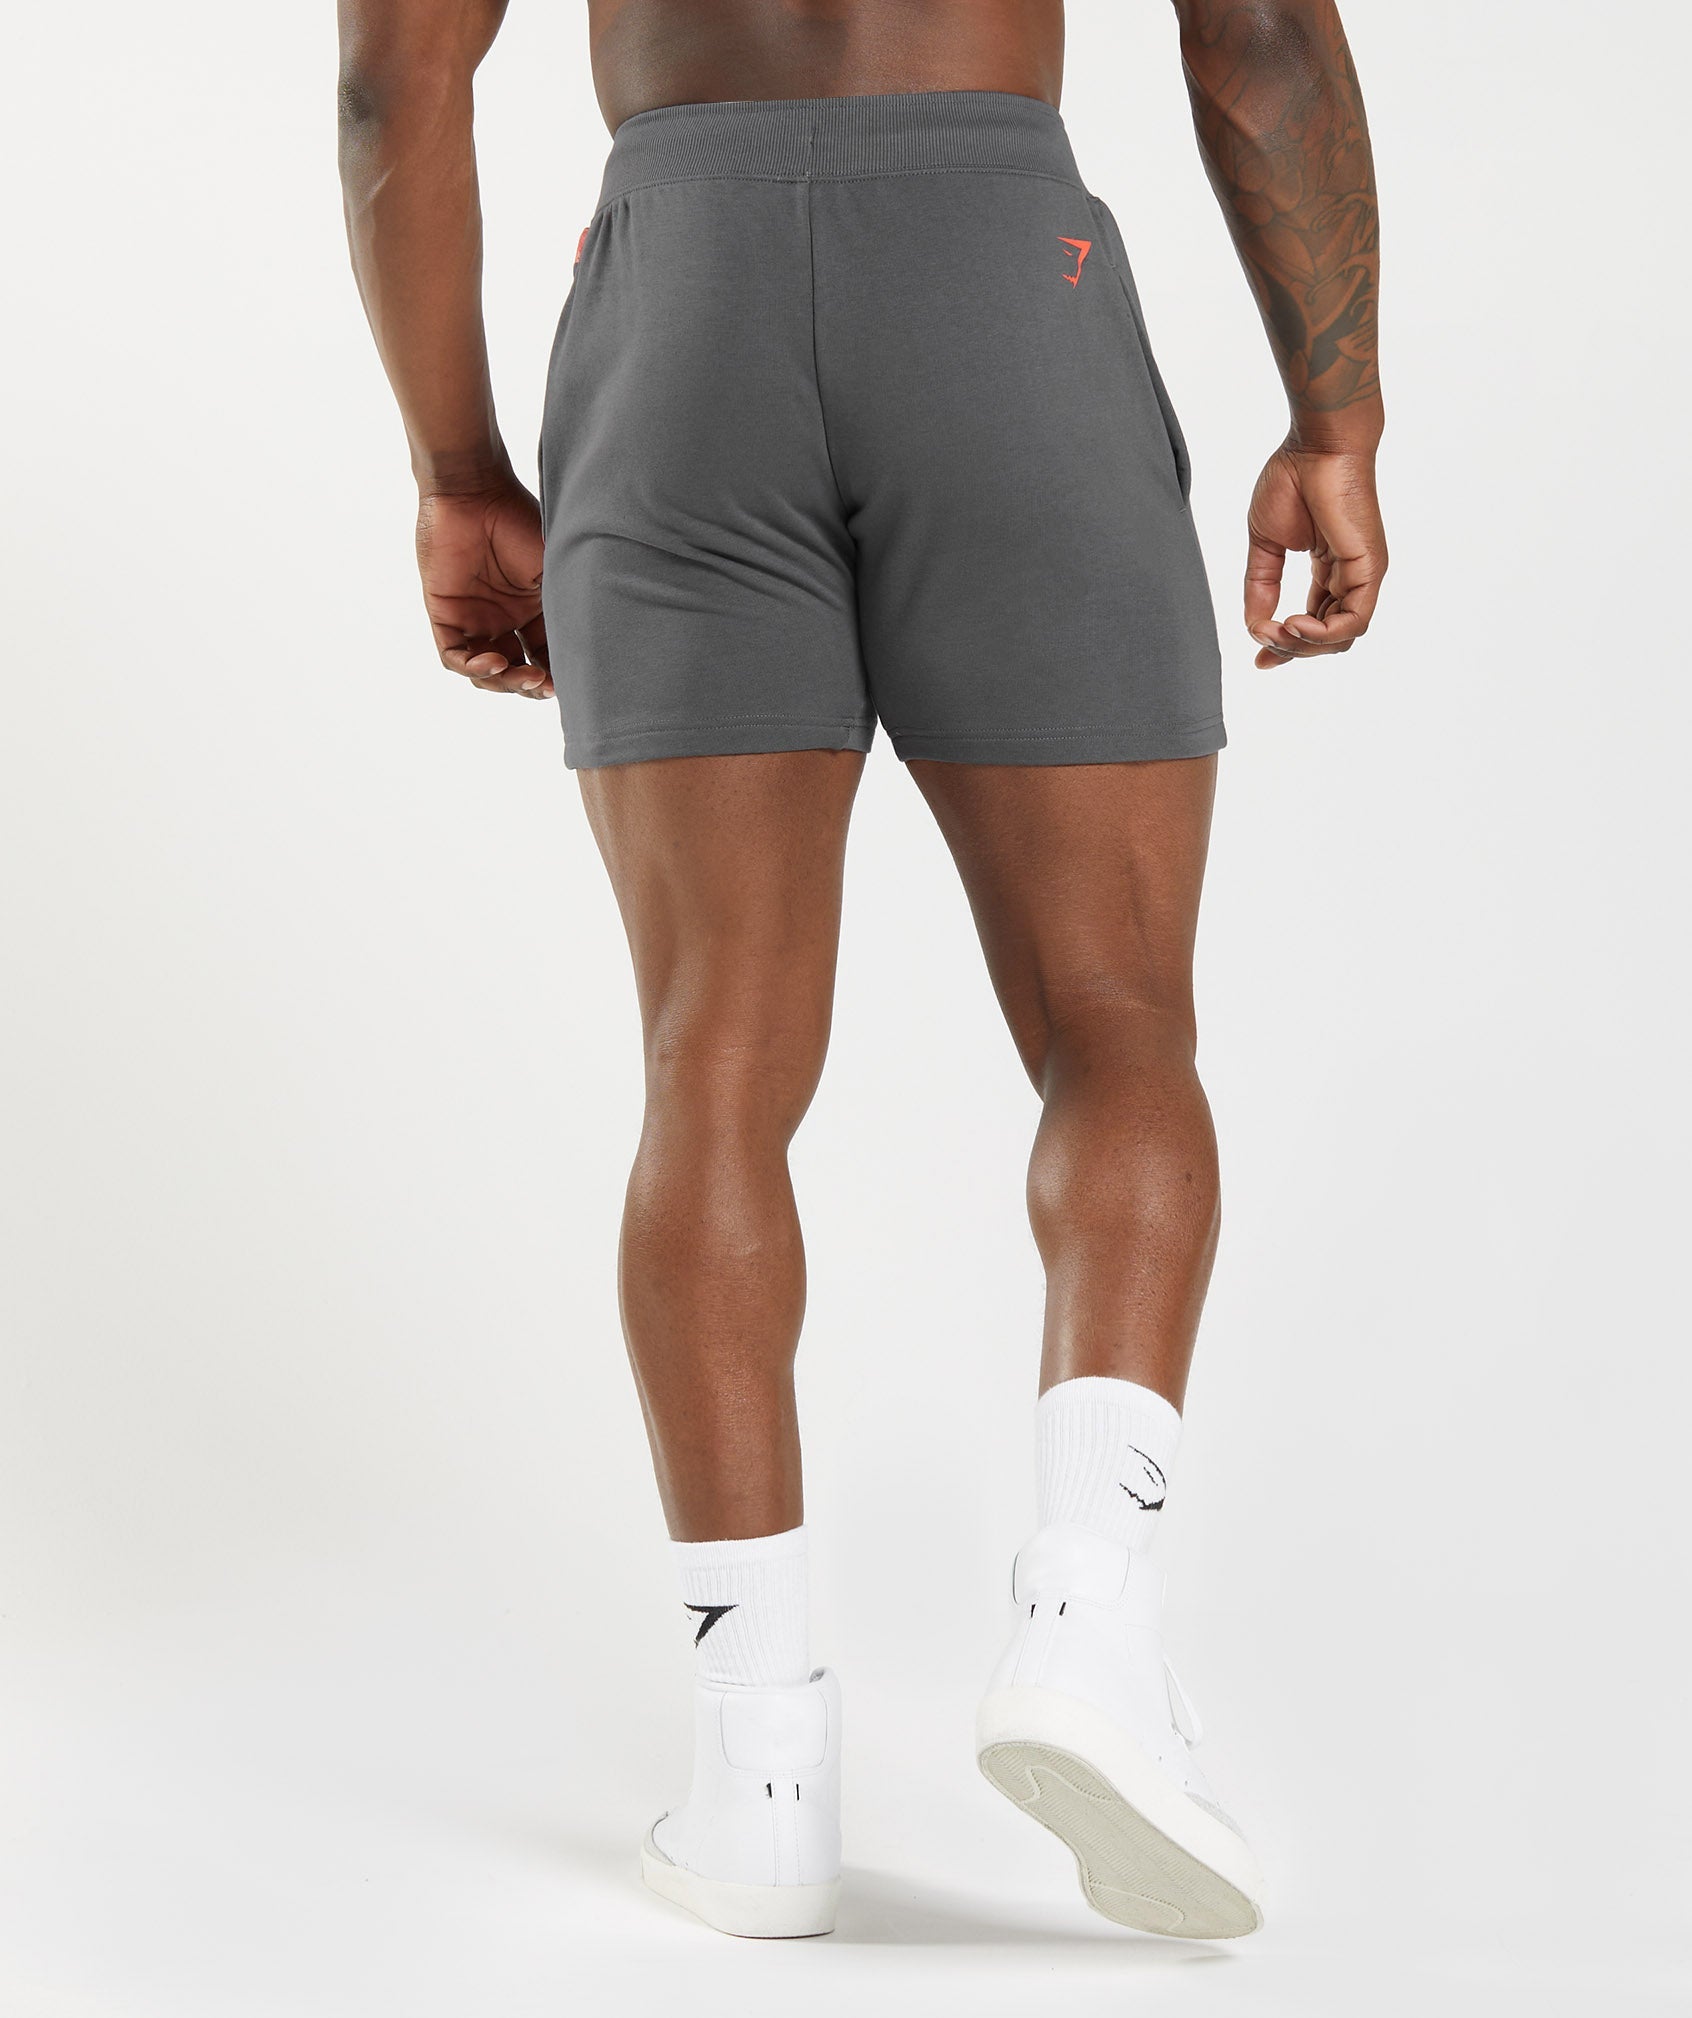 Bold Shorts in Silhouette Grey - view 2